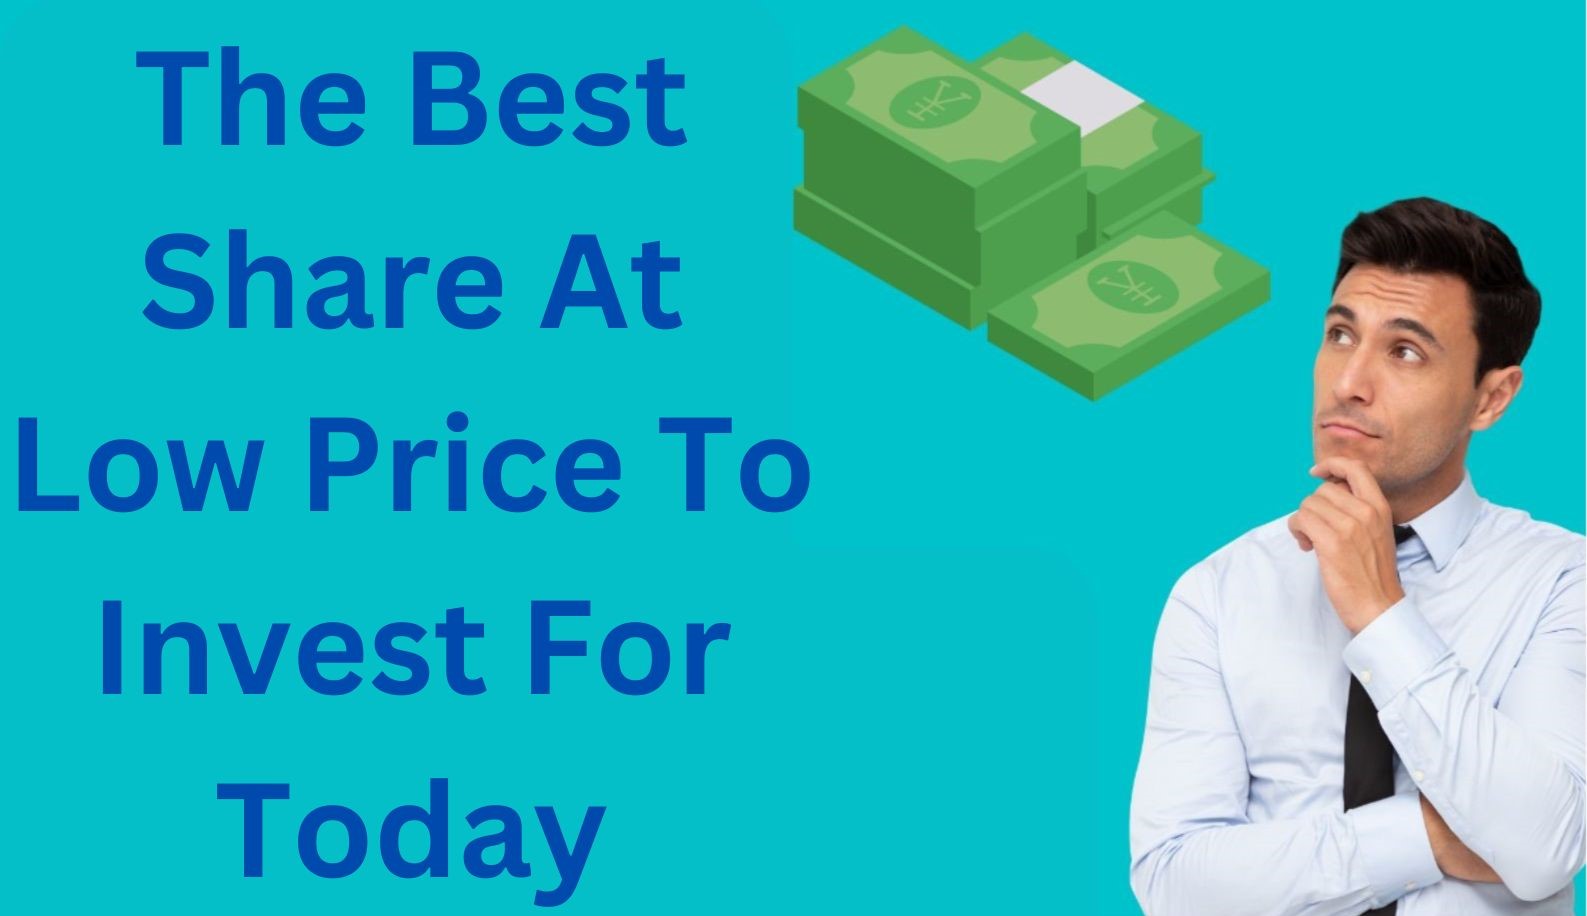 Which Is The Best Share At Low Price To Invest For Today?